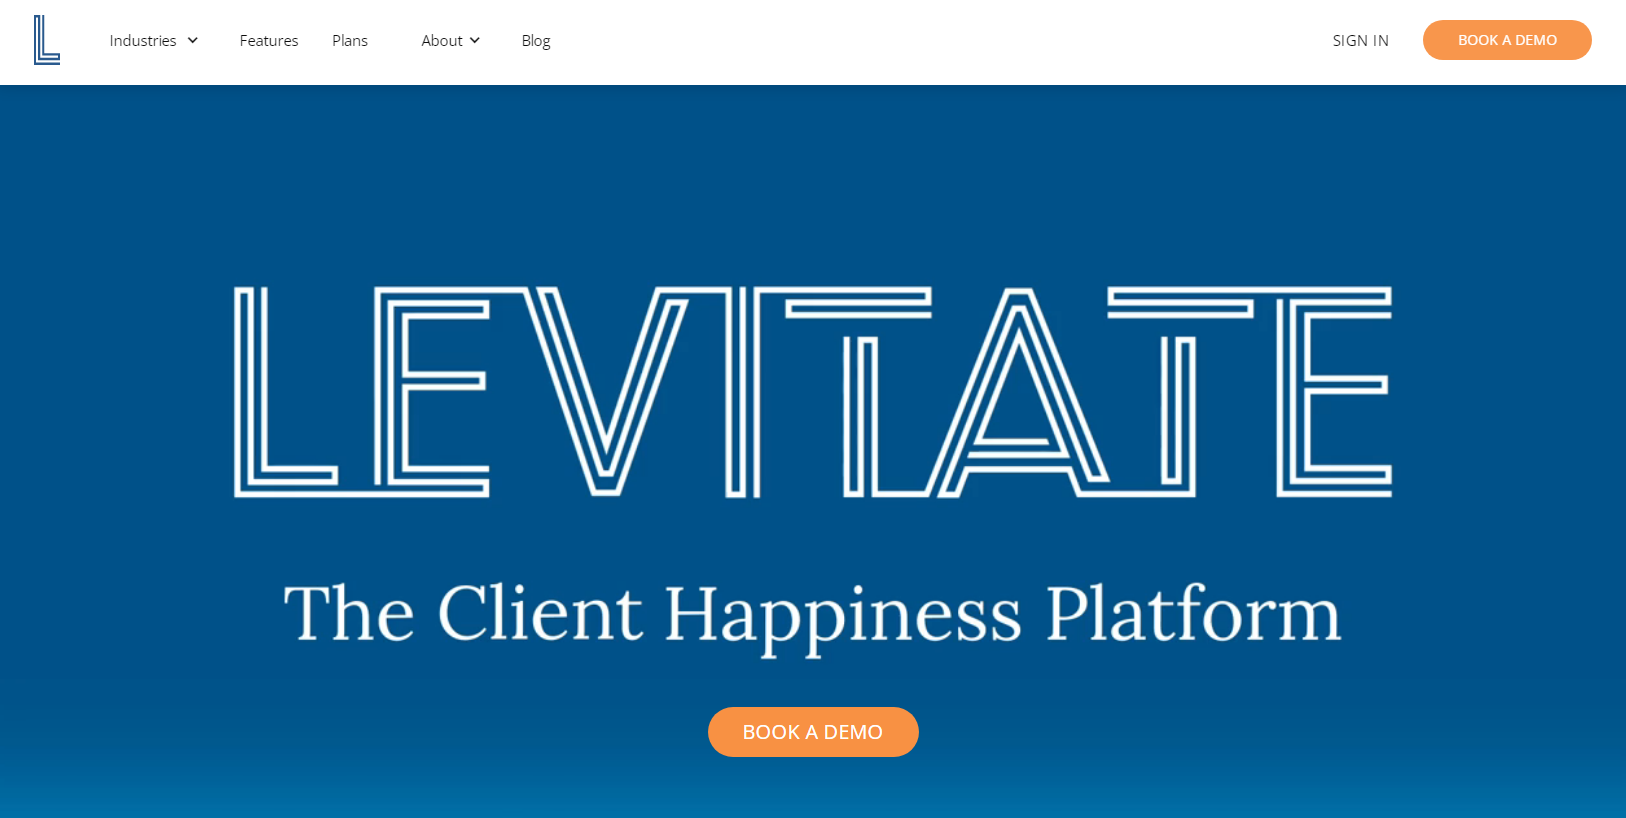 Levitate Raises $14 Million in Funding to Revolutionize “Keep-In-Touch Marketing”.